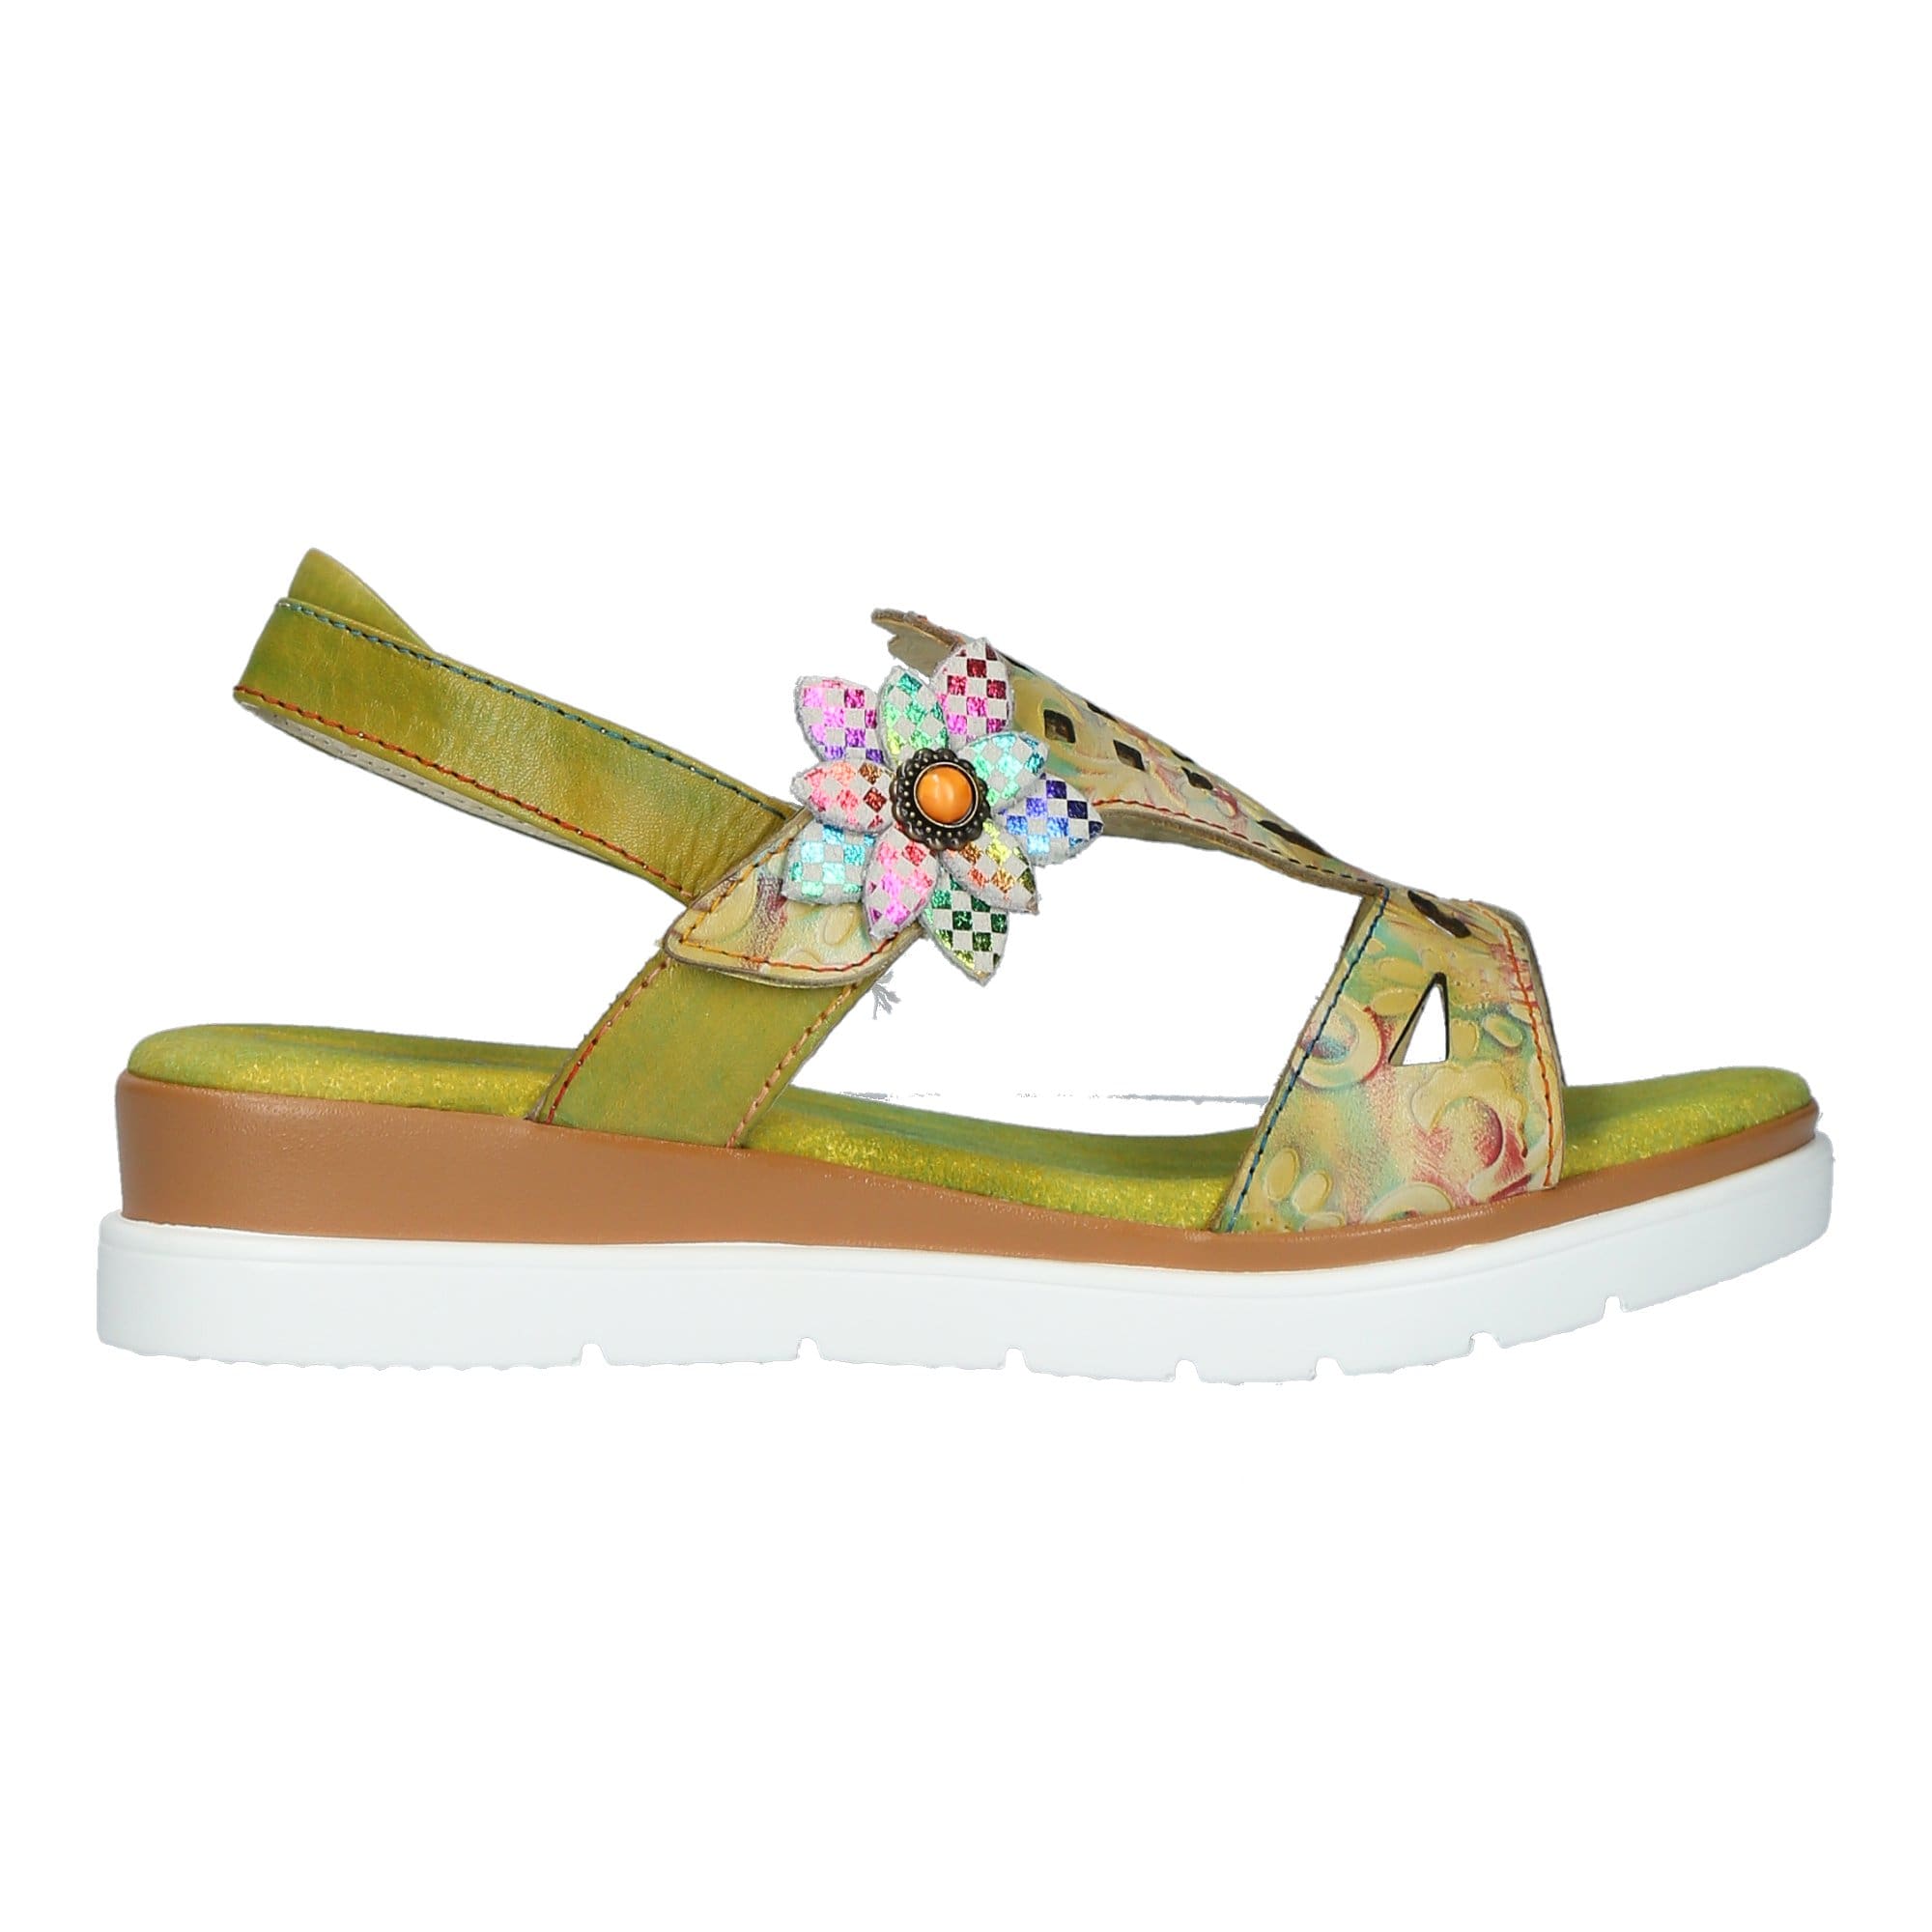 Shoes JACCEEO 04 - 35 / Green - Sandal